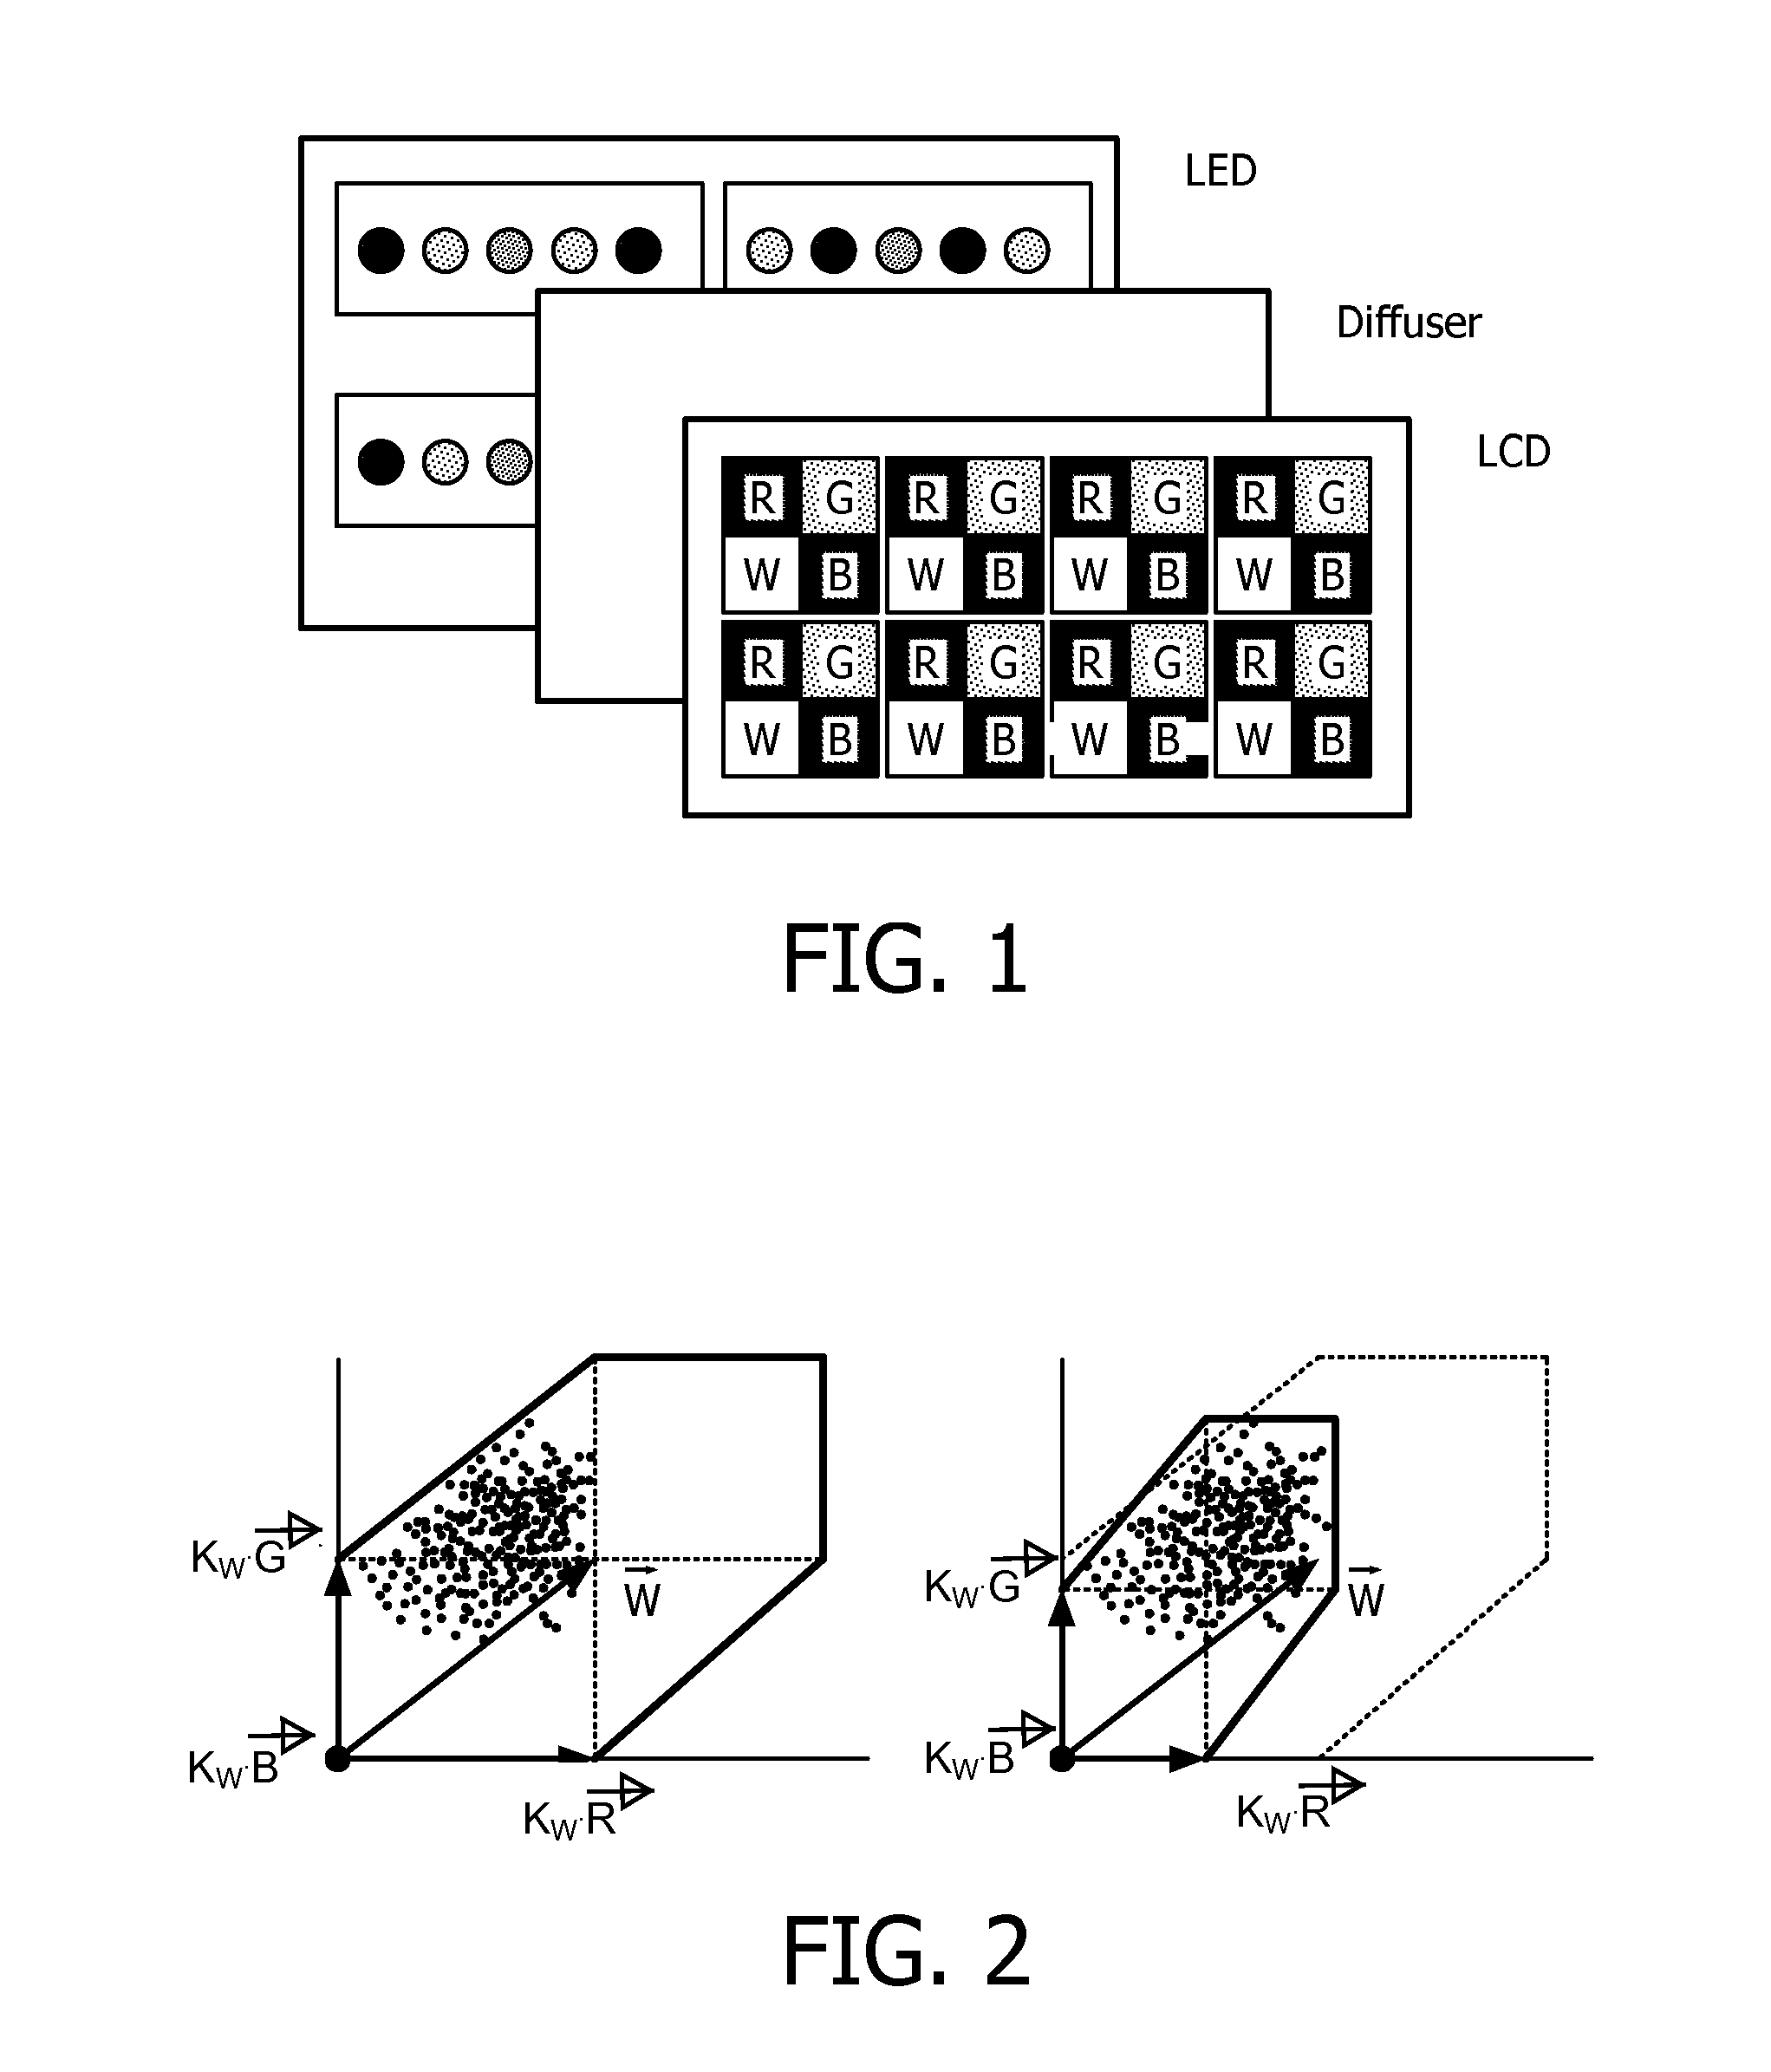 Dynamic gamut control for determining minimum backlight intensities of backlight sources for displaying an image